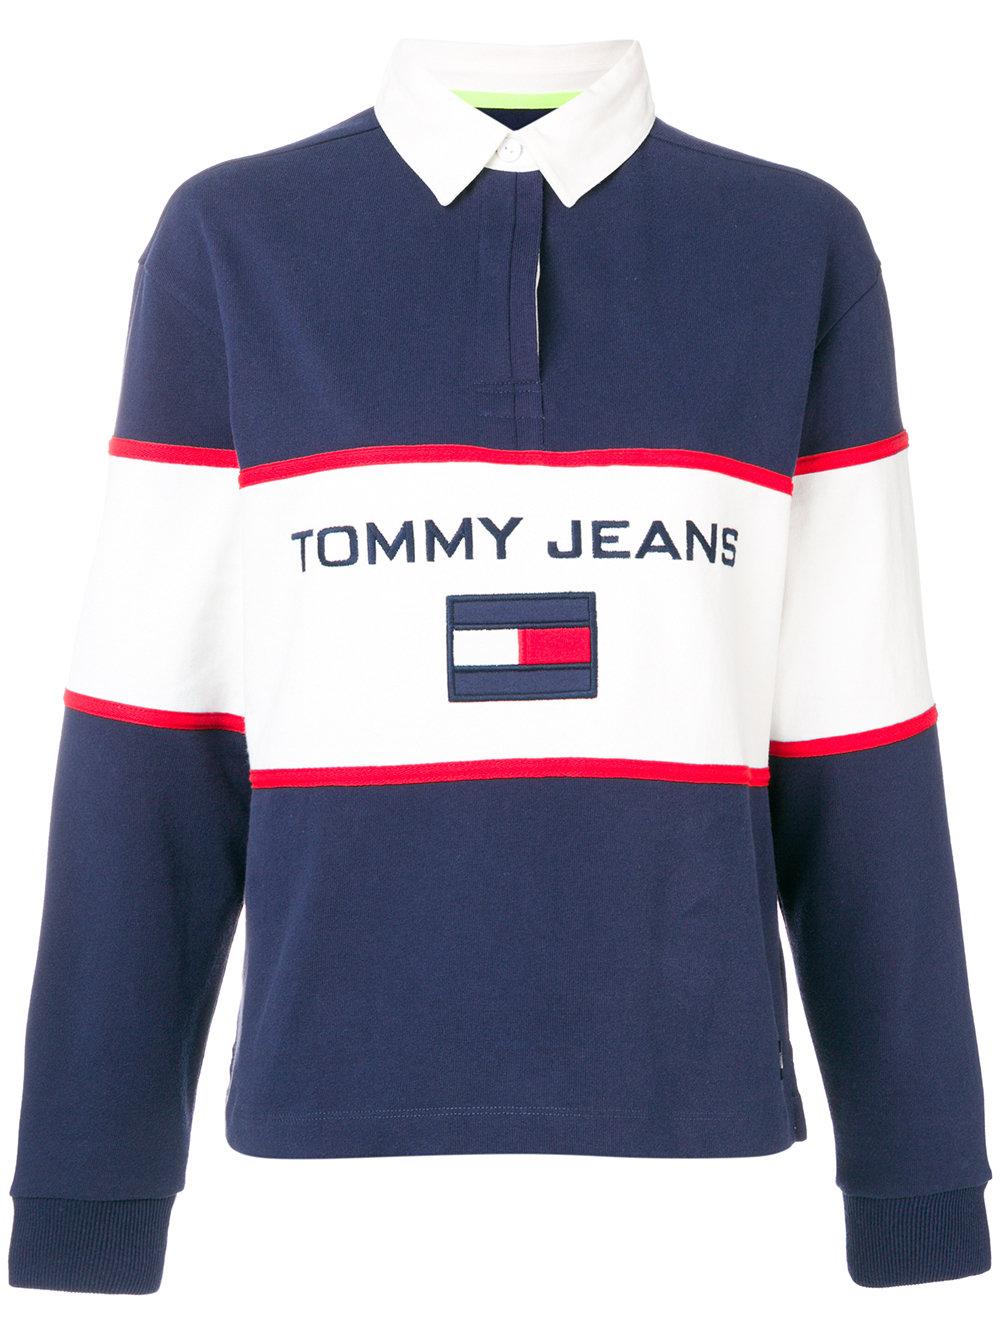 Tommy Hilfiger 90s Rugby Polo Shirt 